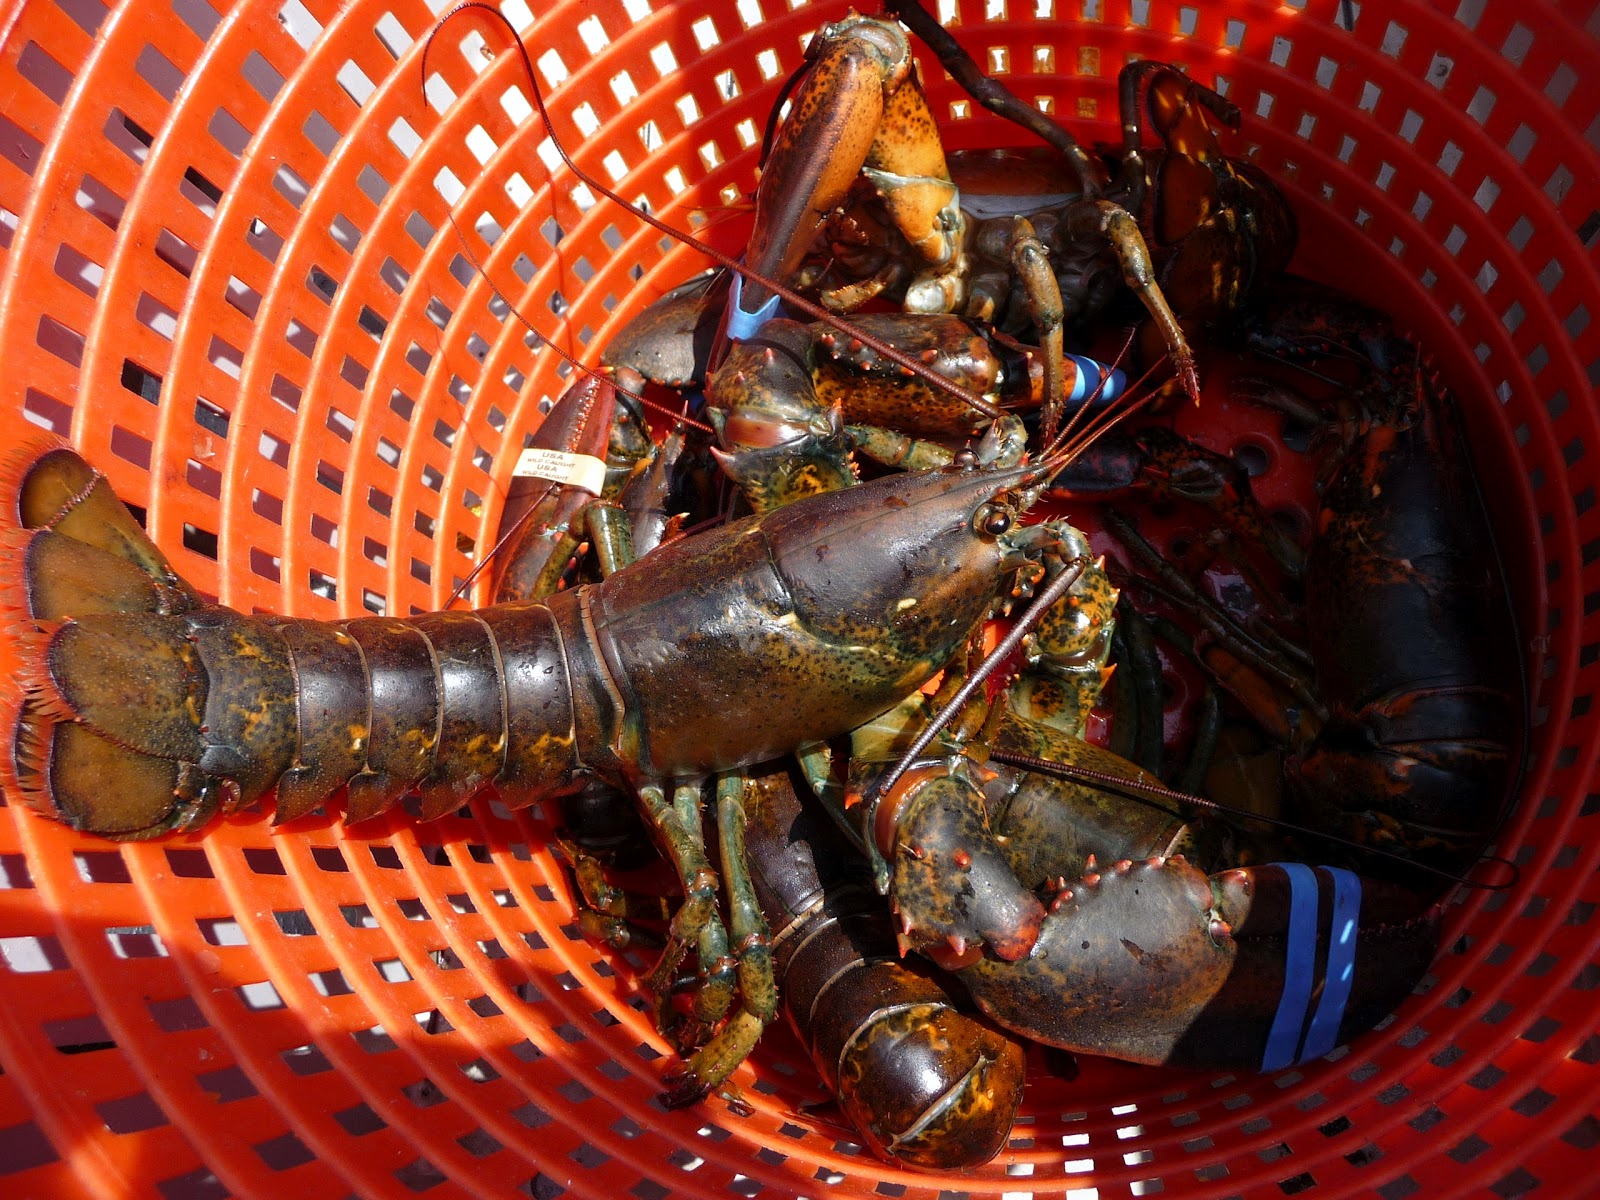 Chef Bolek: A Day in the Life of a Lobster Fisherman